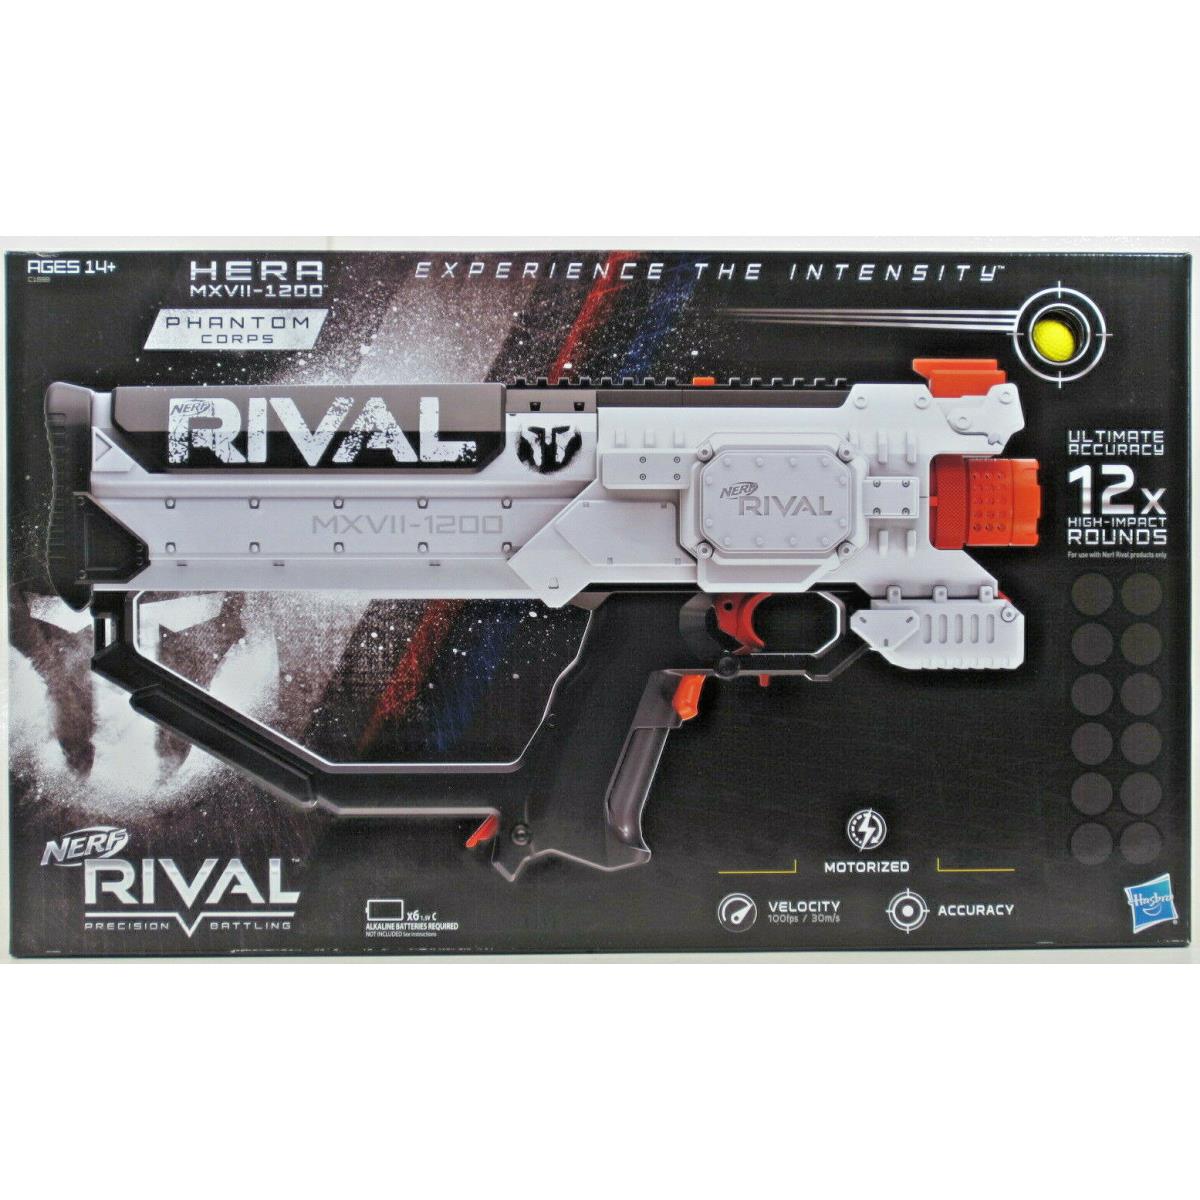 Nerf Rival Hera Mxvii 1200 White Combat Blaster w/ 12 Rounds Fires 100 Fps